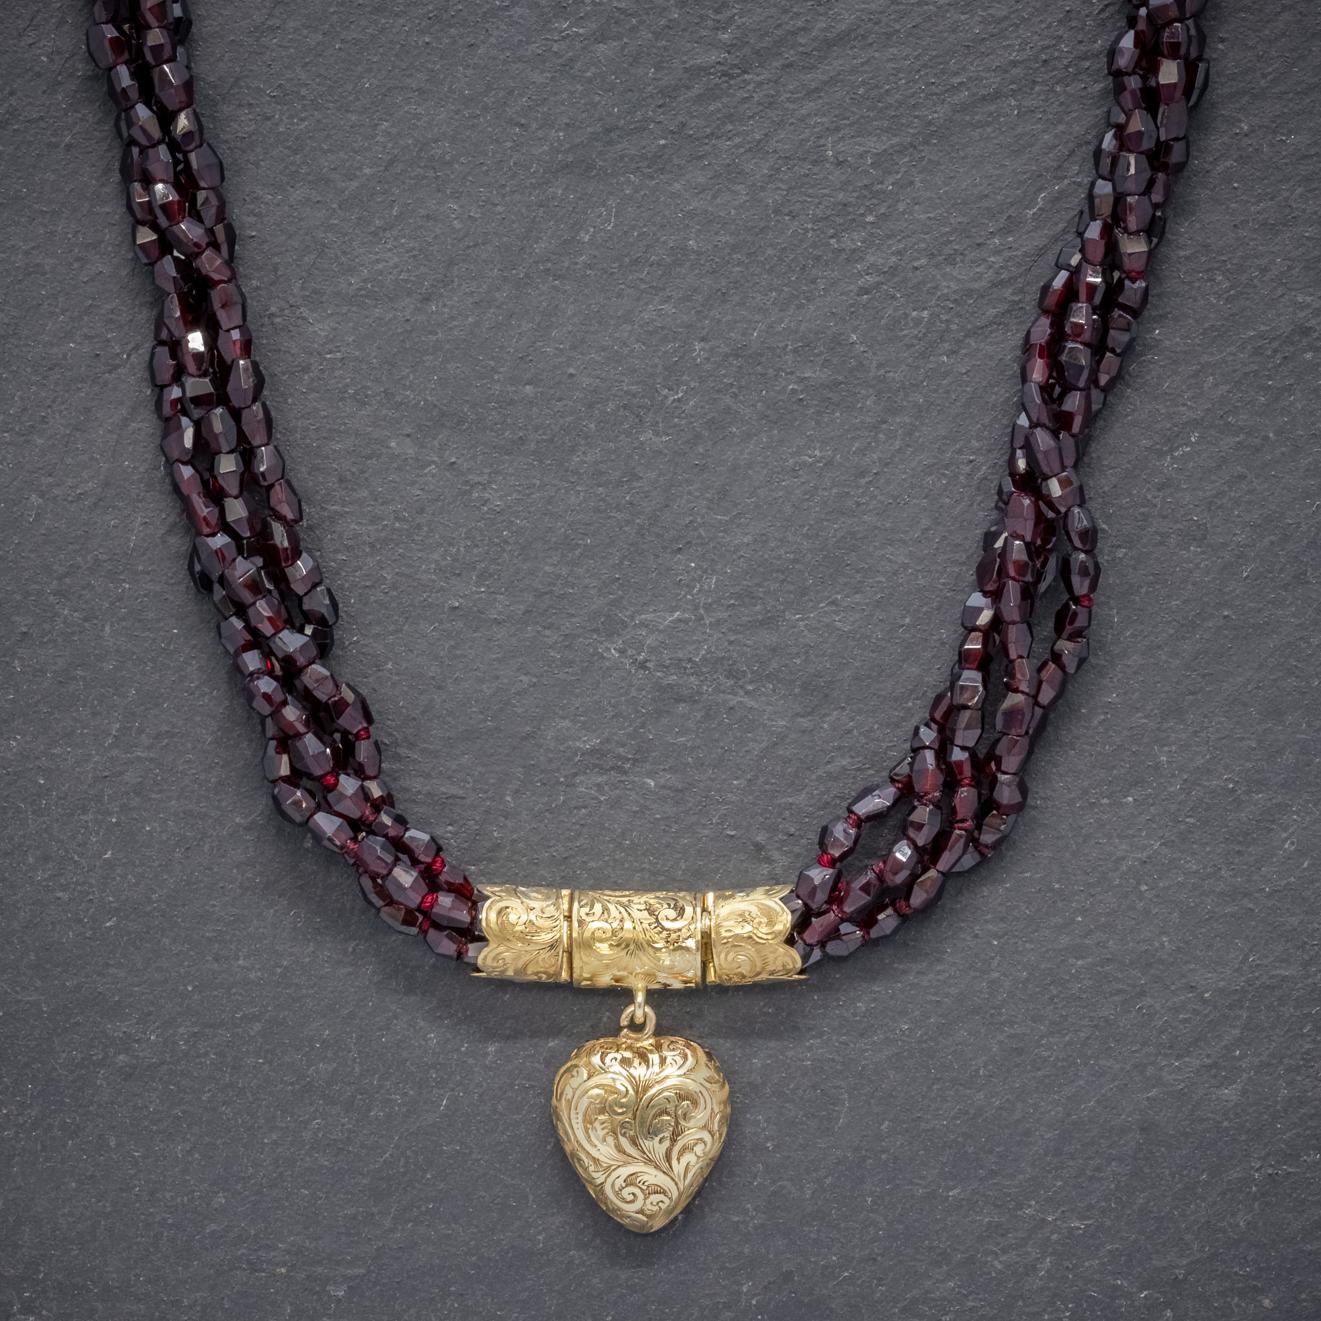 A spectacular antique Georgian necklace made up of four strands lined with faceted Garnet beads forming a twisting bundle that shimmers and sparkles with a deep red wine-coloured hue.  

The crowning feature of the necklace is a beautiful 18ct